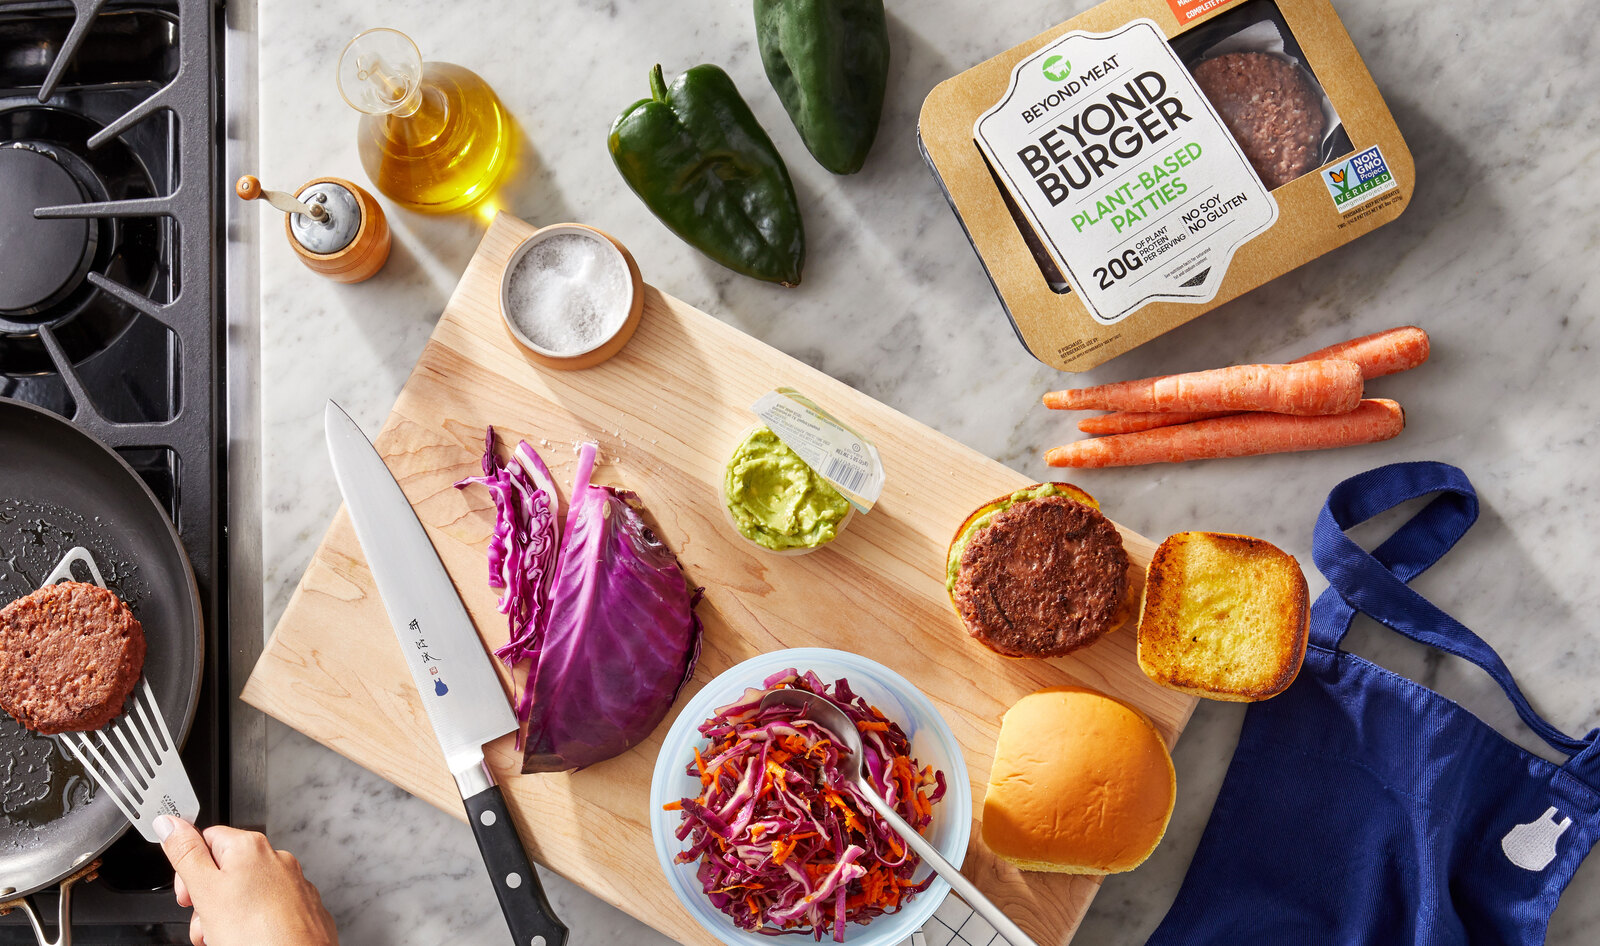 Beyond Meat to Debut on Blue Apron Menus This Summer